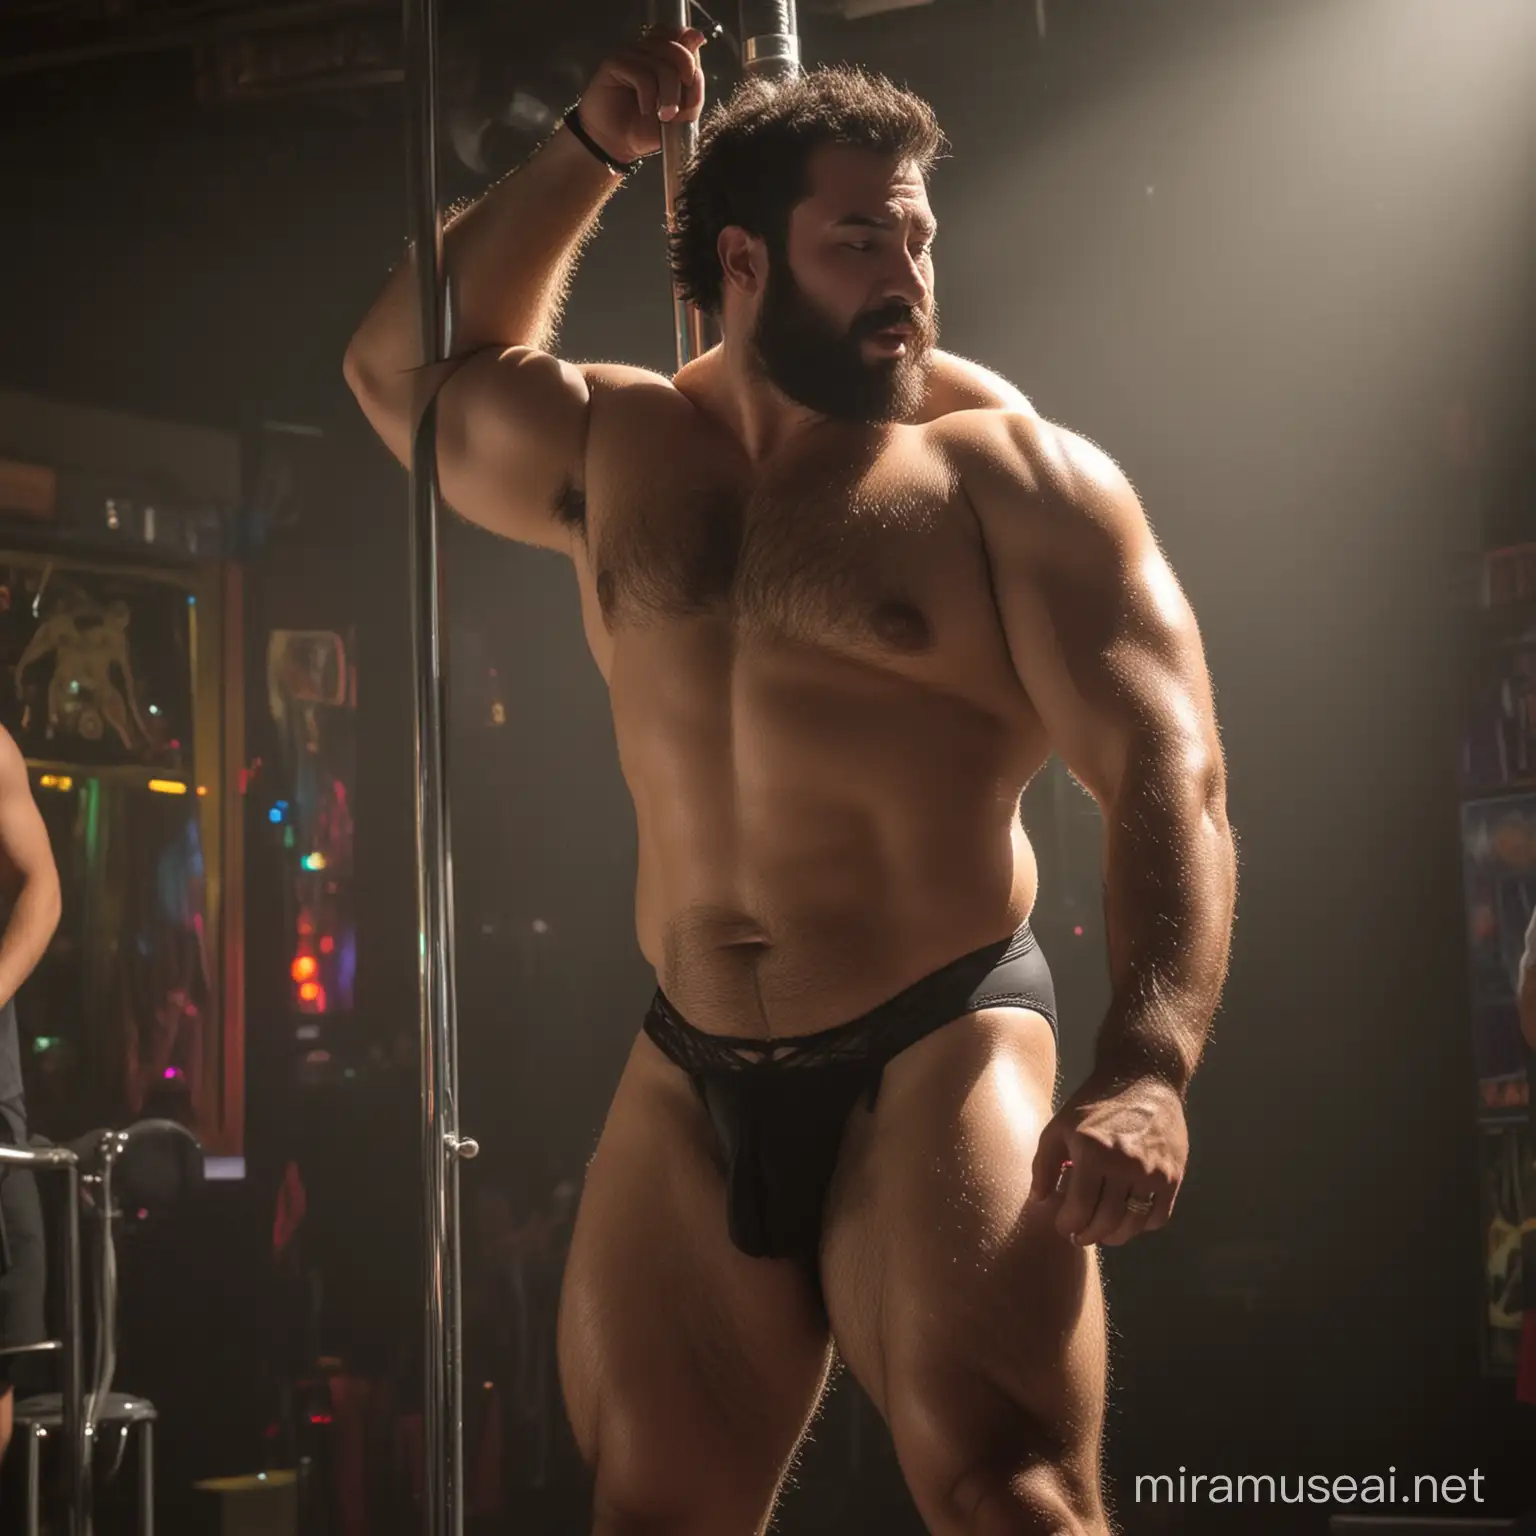 A hot, very hairy, muscular, overweight, Hispanic gay bear, in a black thong, dancing on a pole in the dimly lit atmosphere of a gay club.

